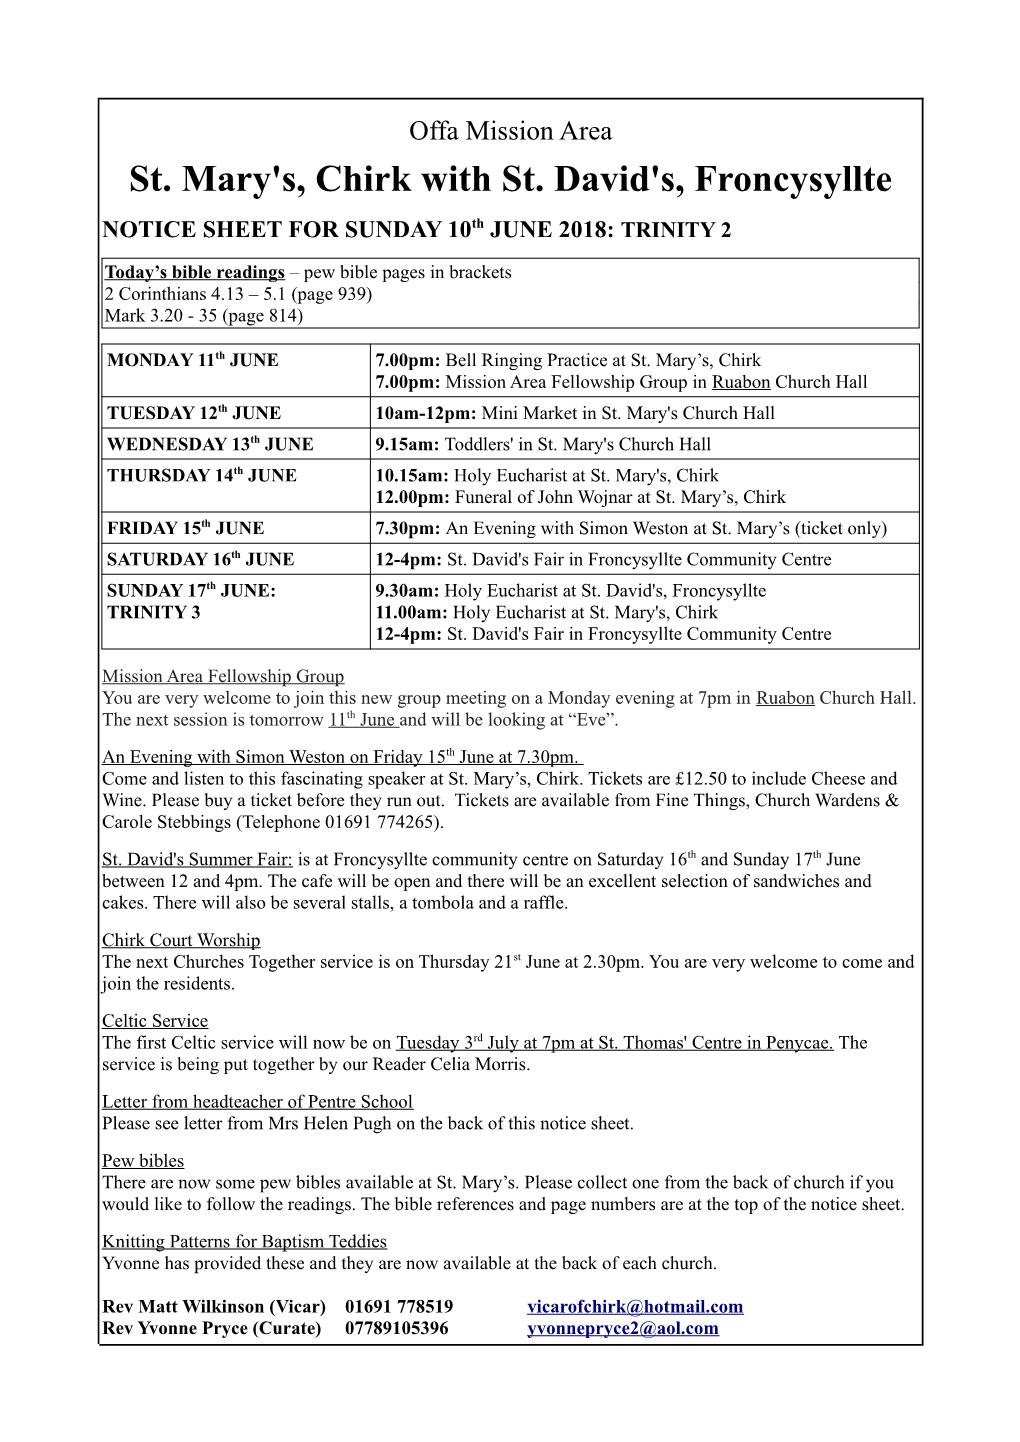 St. Mary's, Chirk with St. David's, Froncysyllte NOTICE SHEET for SUNDAY 10Th JUNE 2018: TRINITY 2